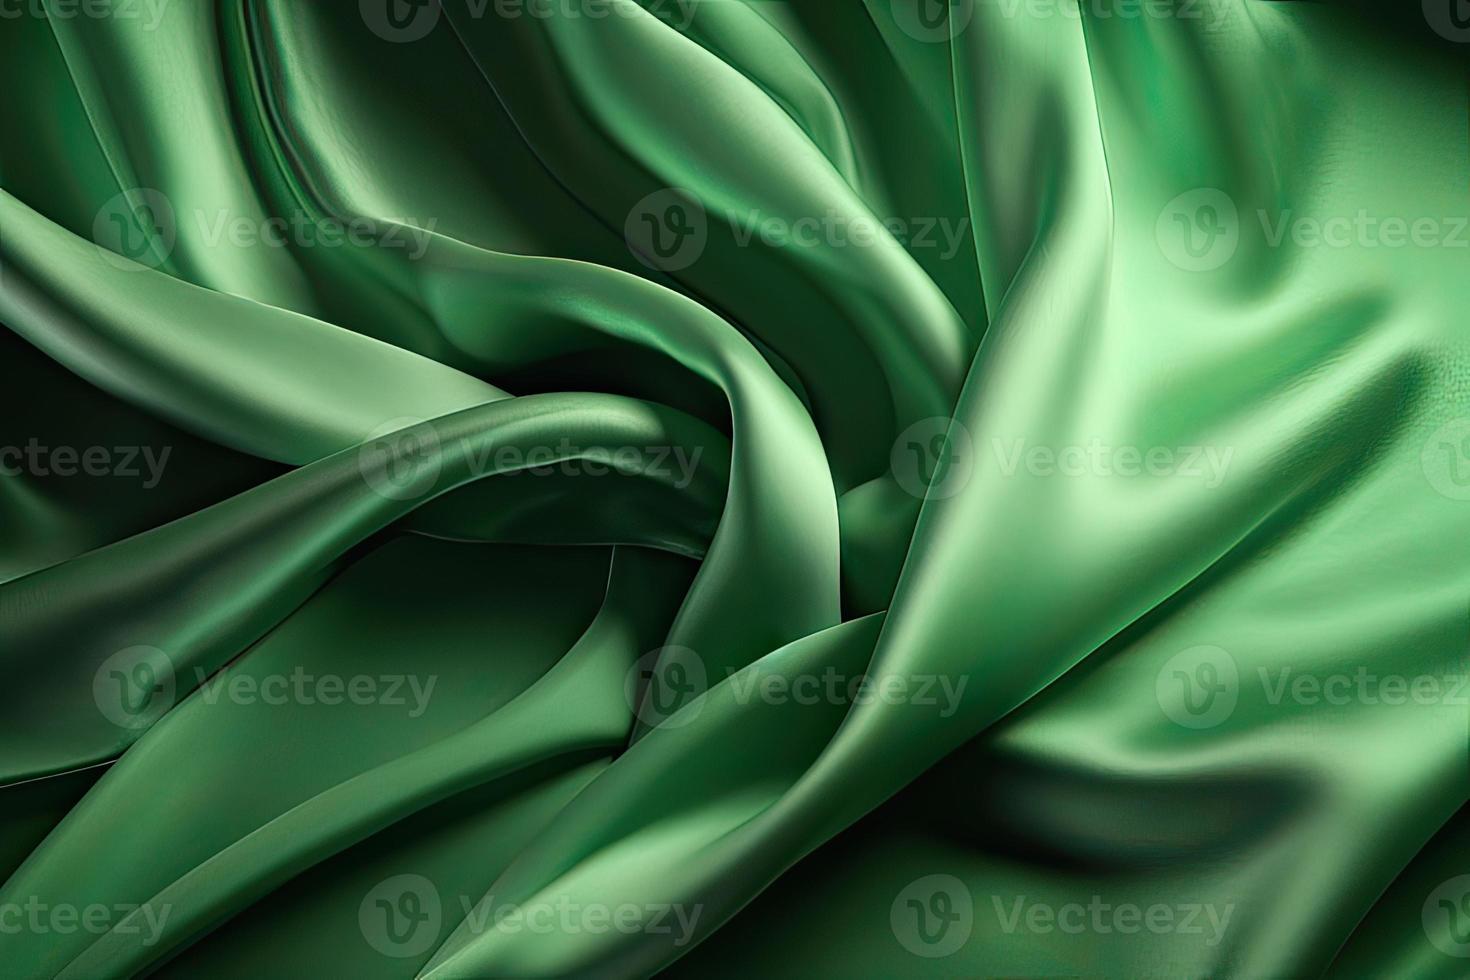 Smooth elegant green silk or satin texture can use as background photo